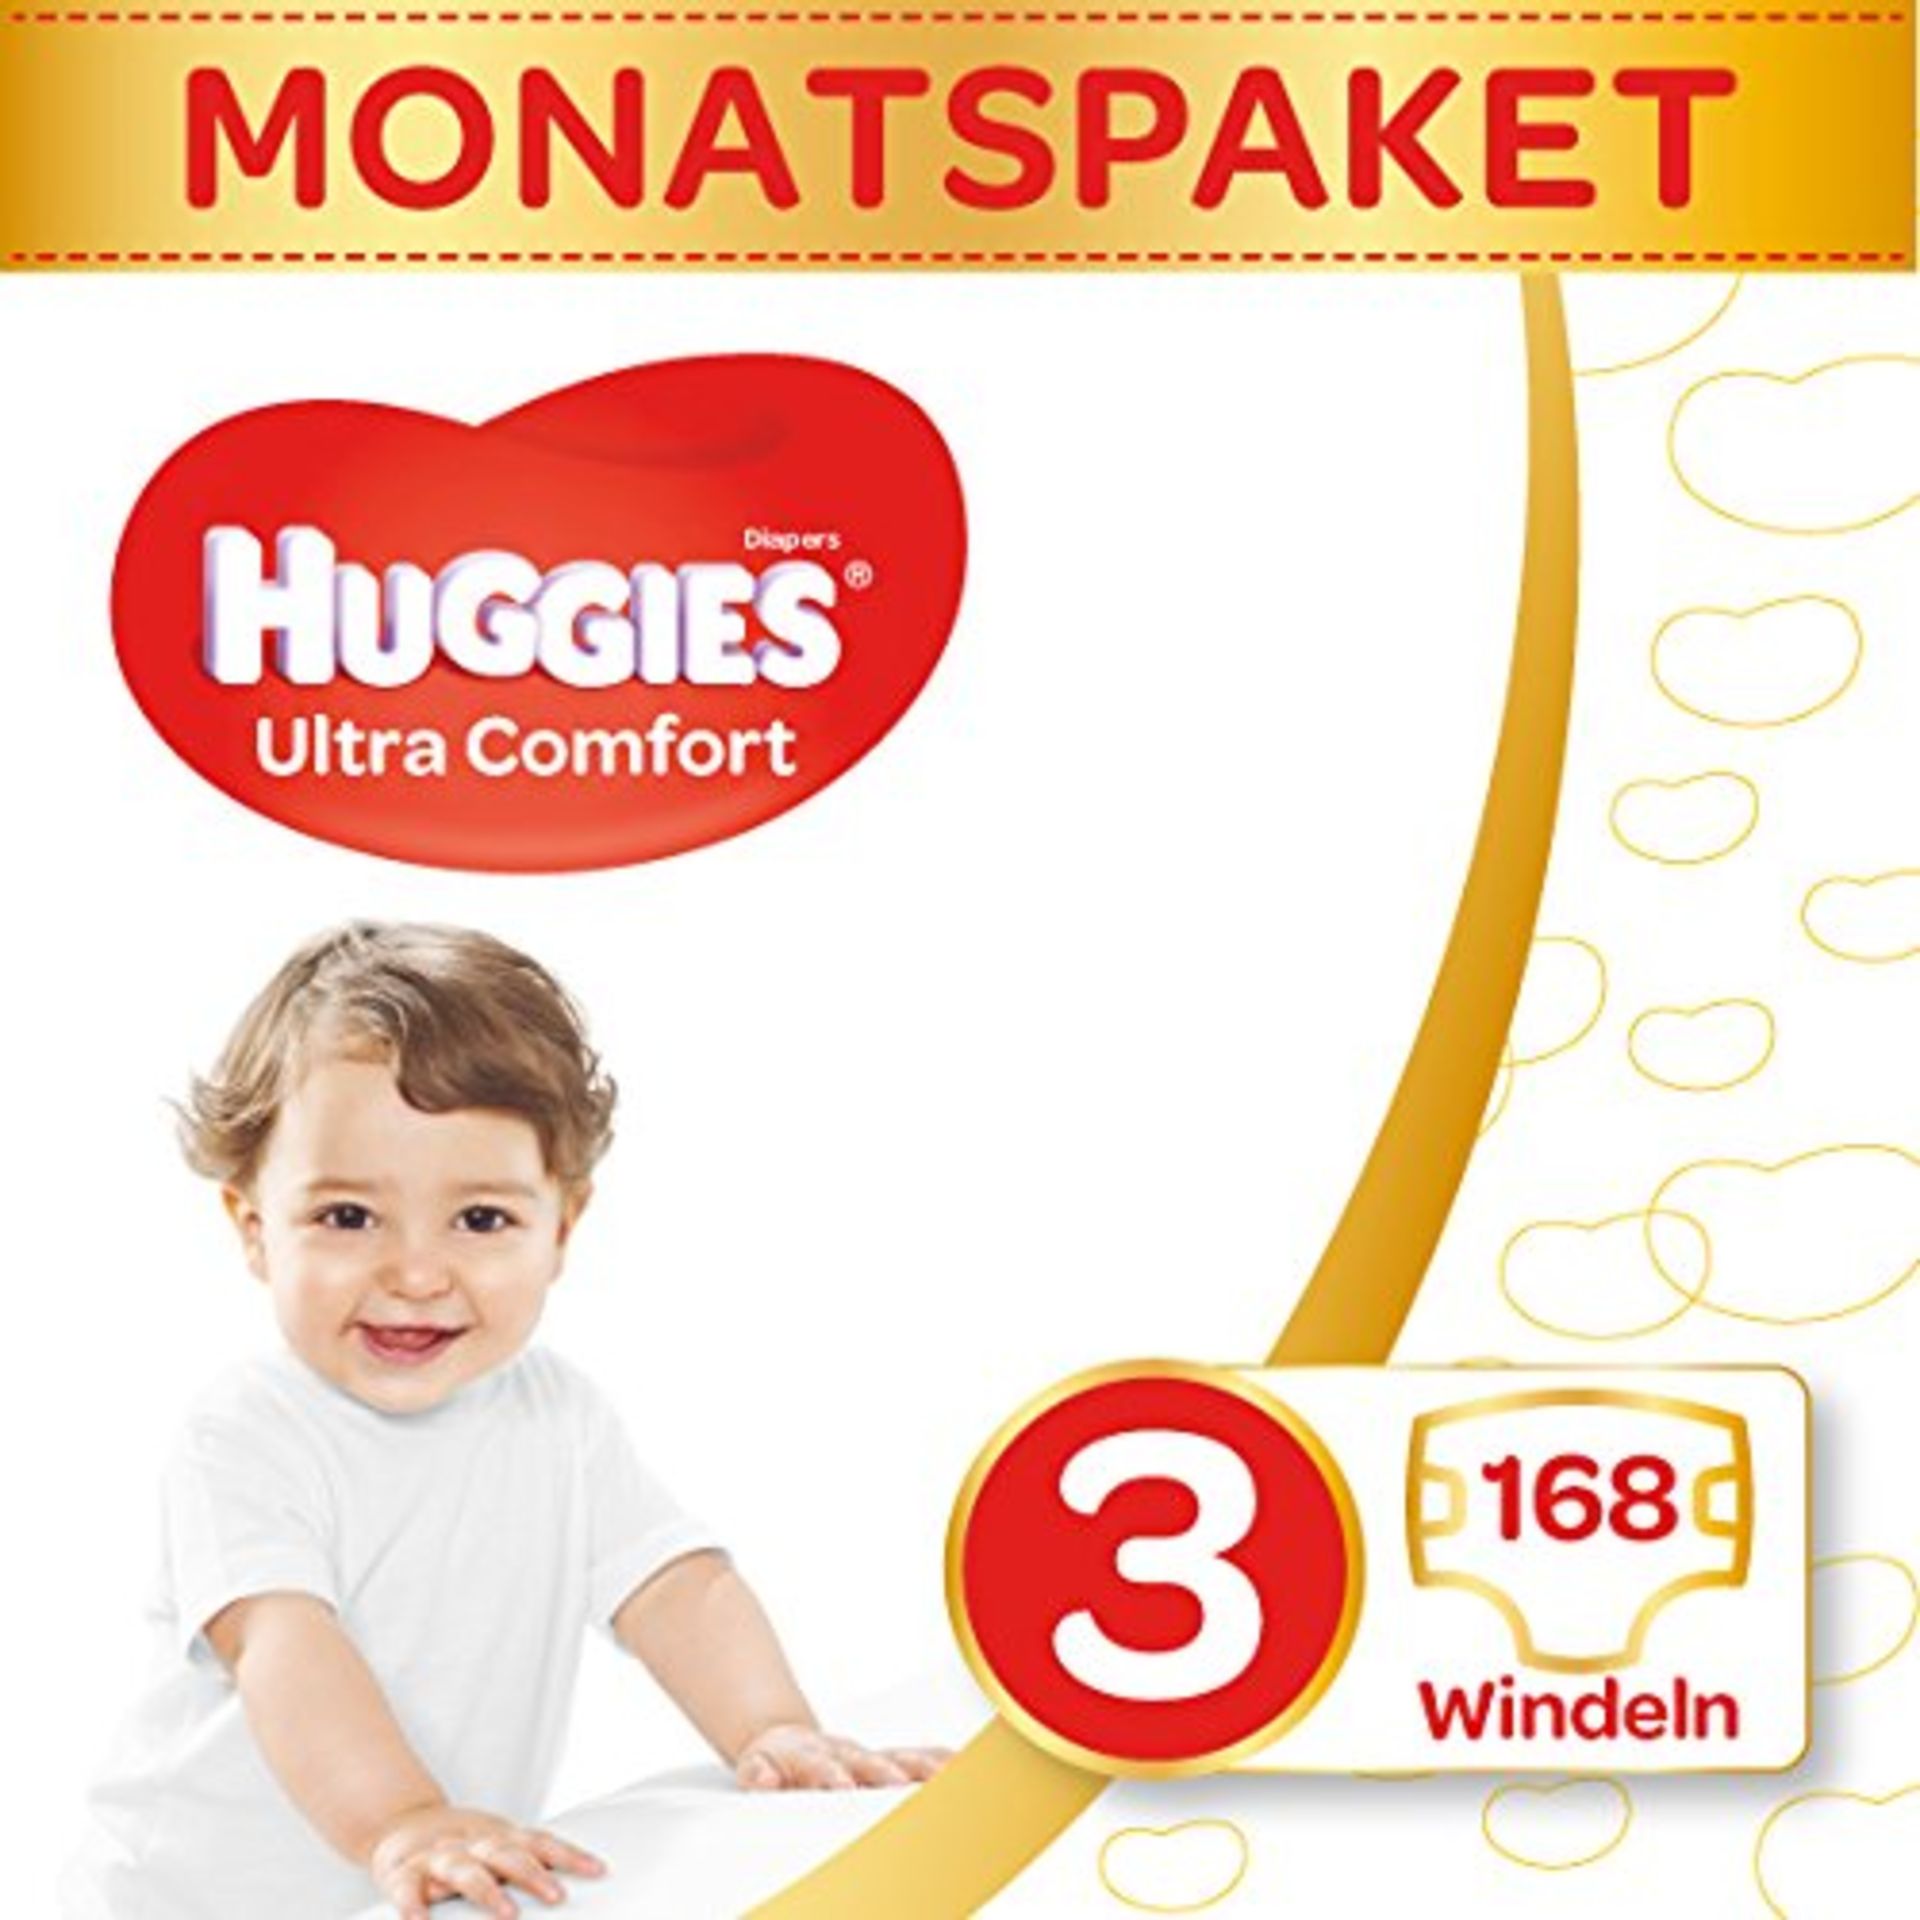 Brand new Huggies Nappies Size 3, Ultra Month Supply (Box of 168)